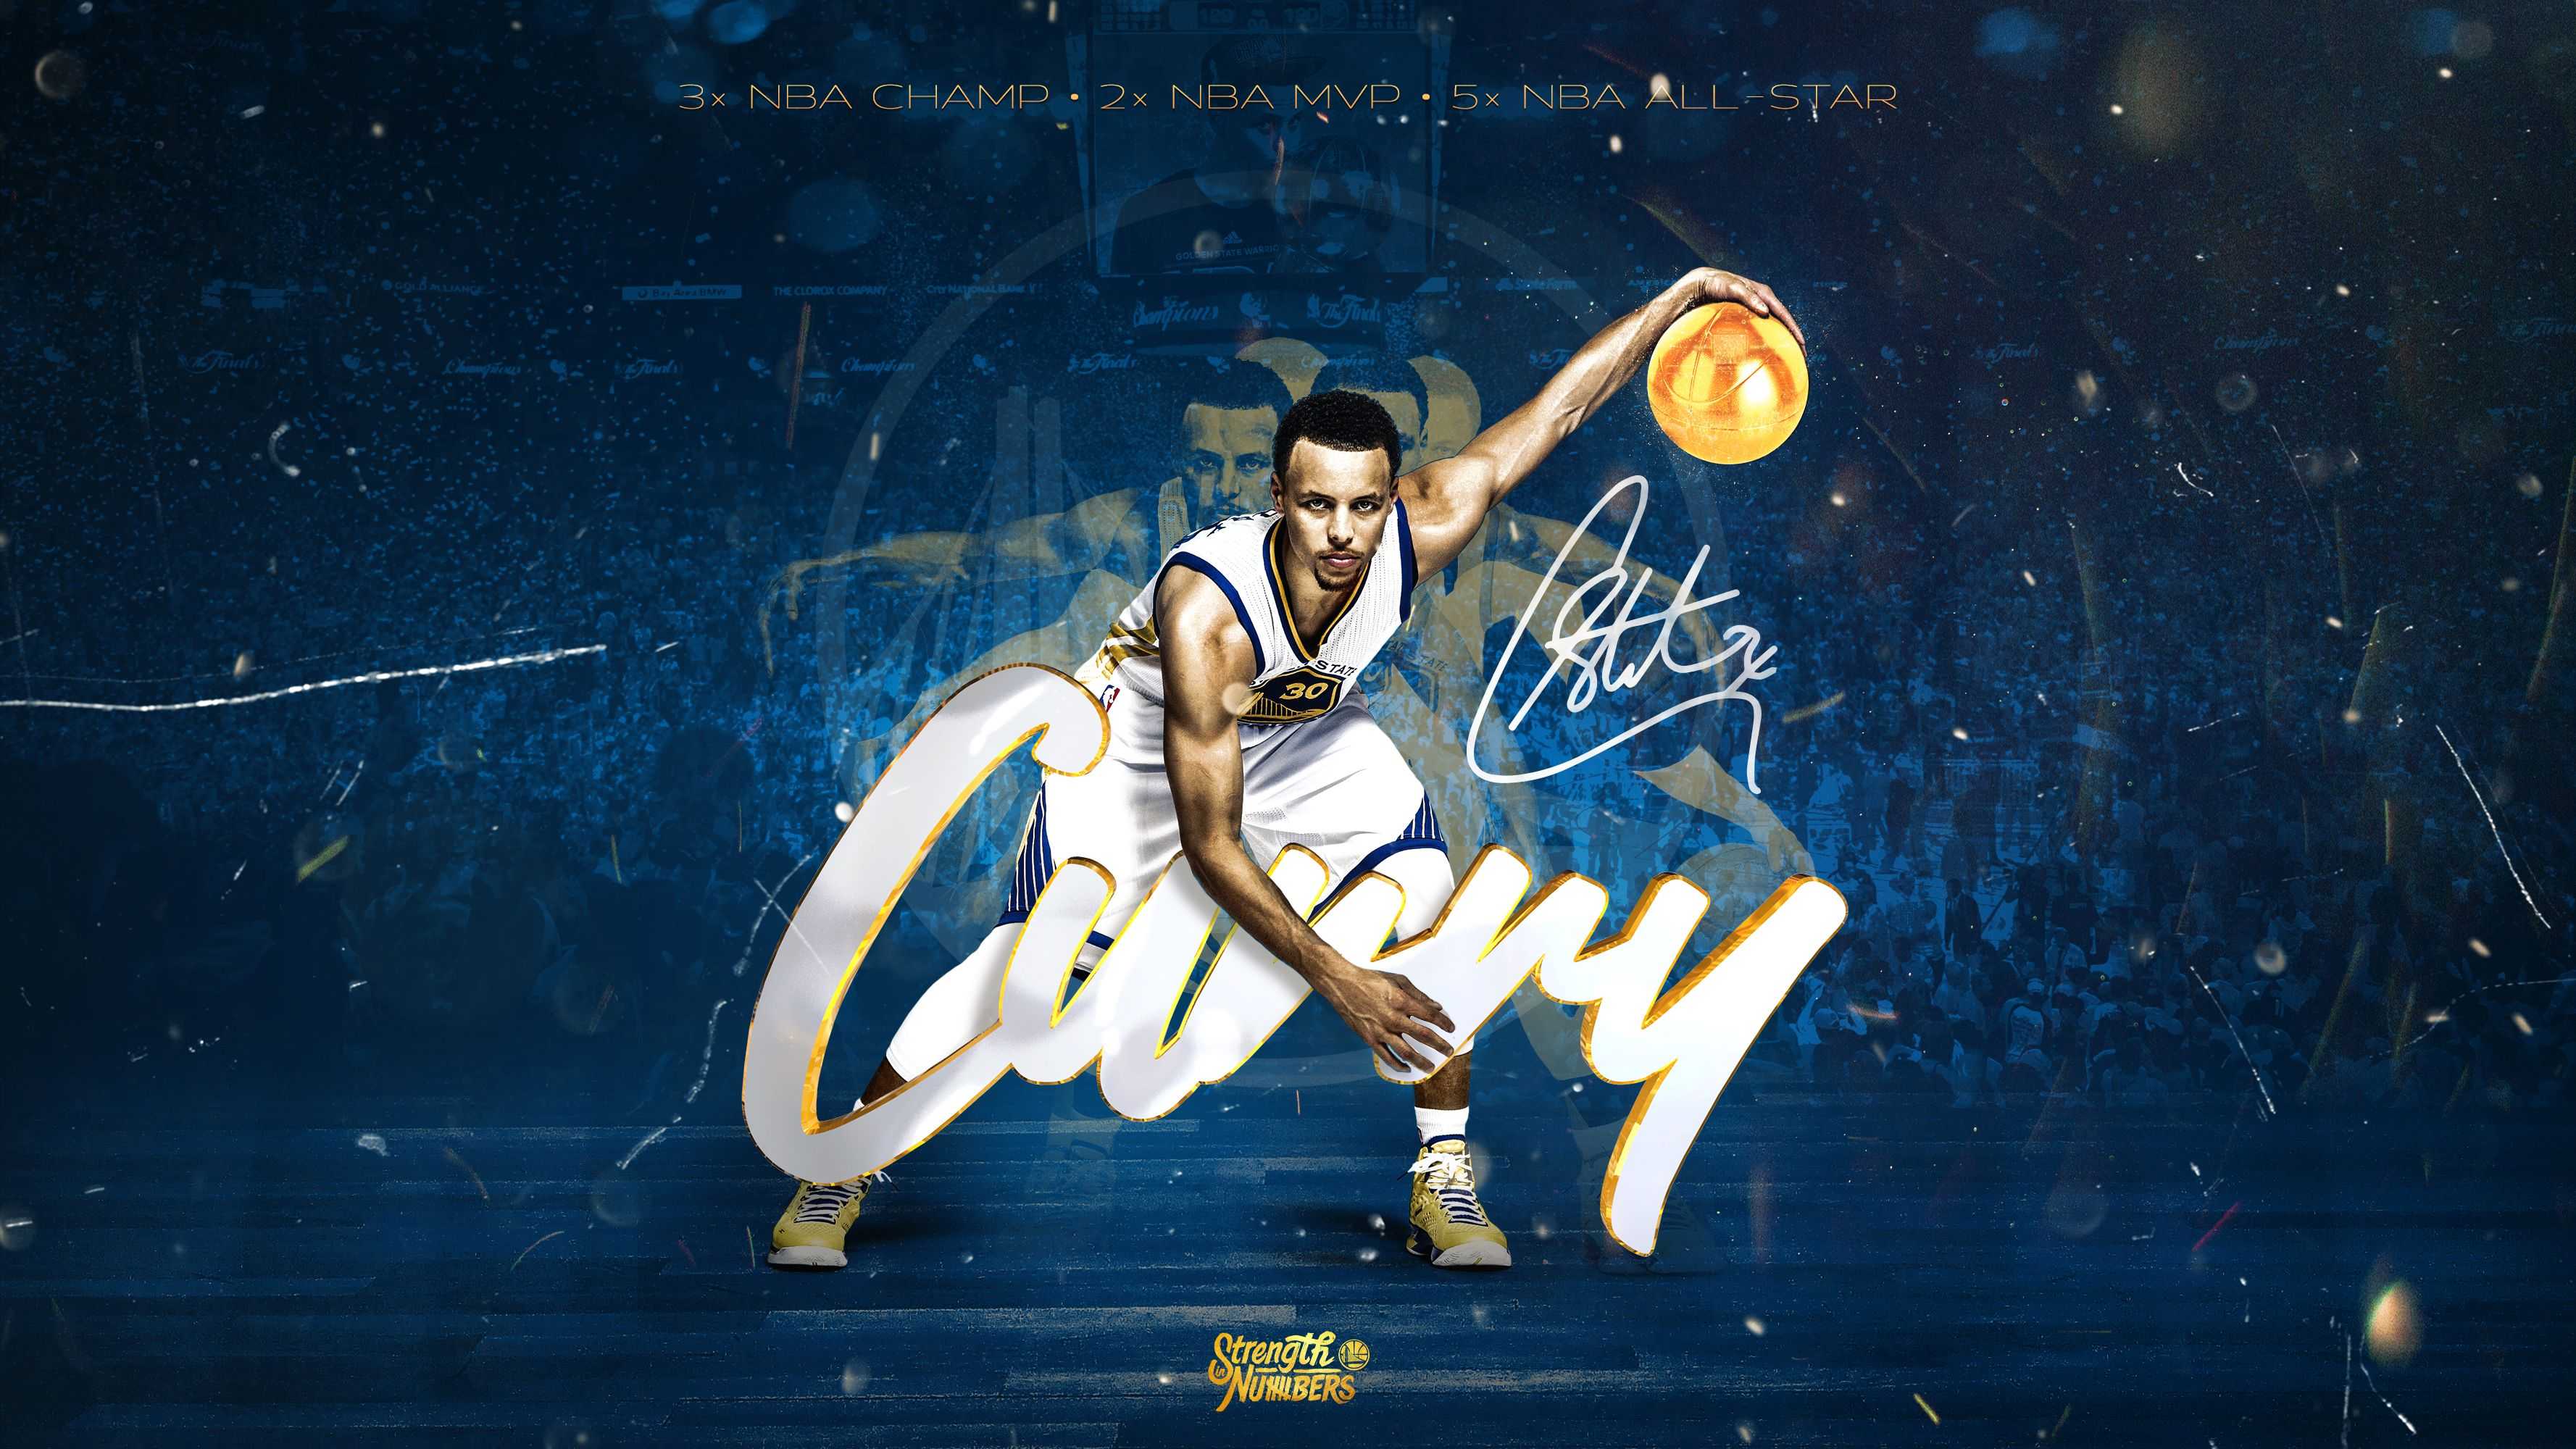 Stephen Curry High Definition Wallpaper 